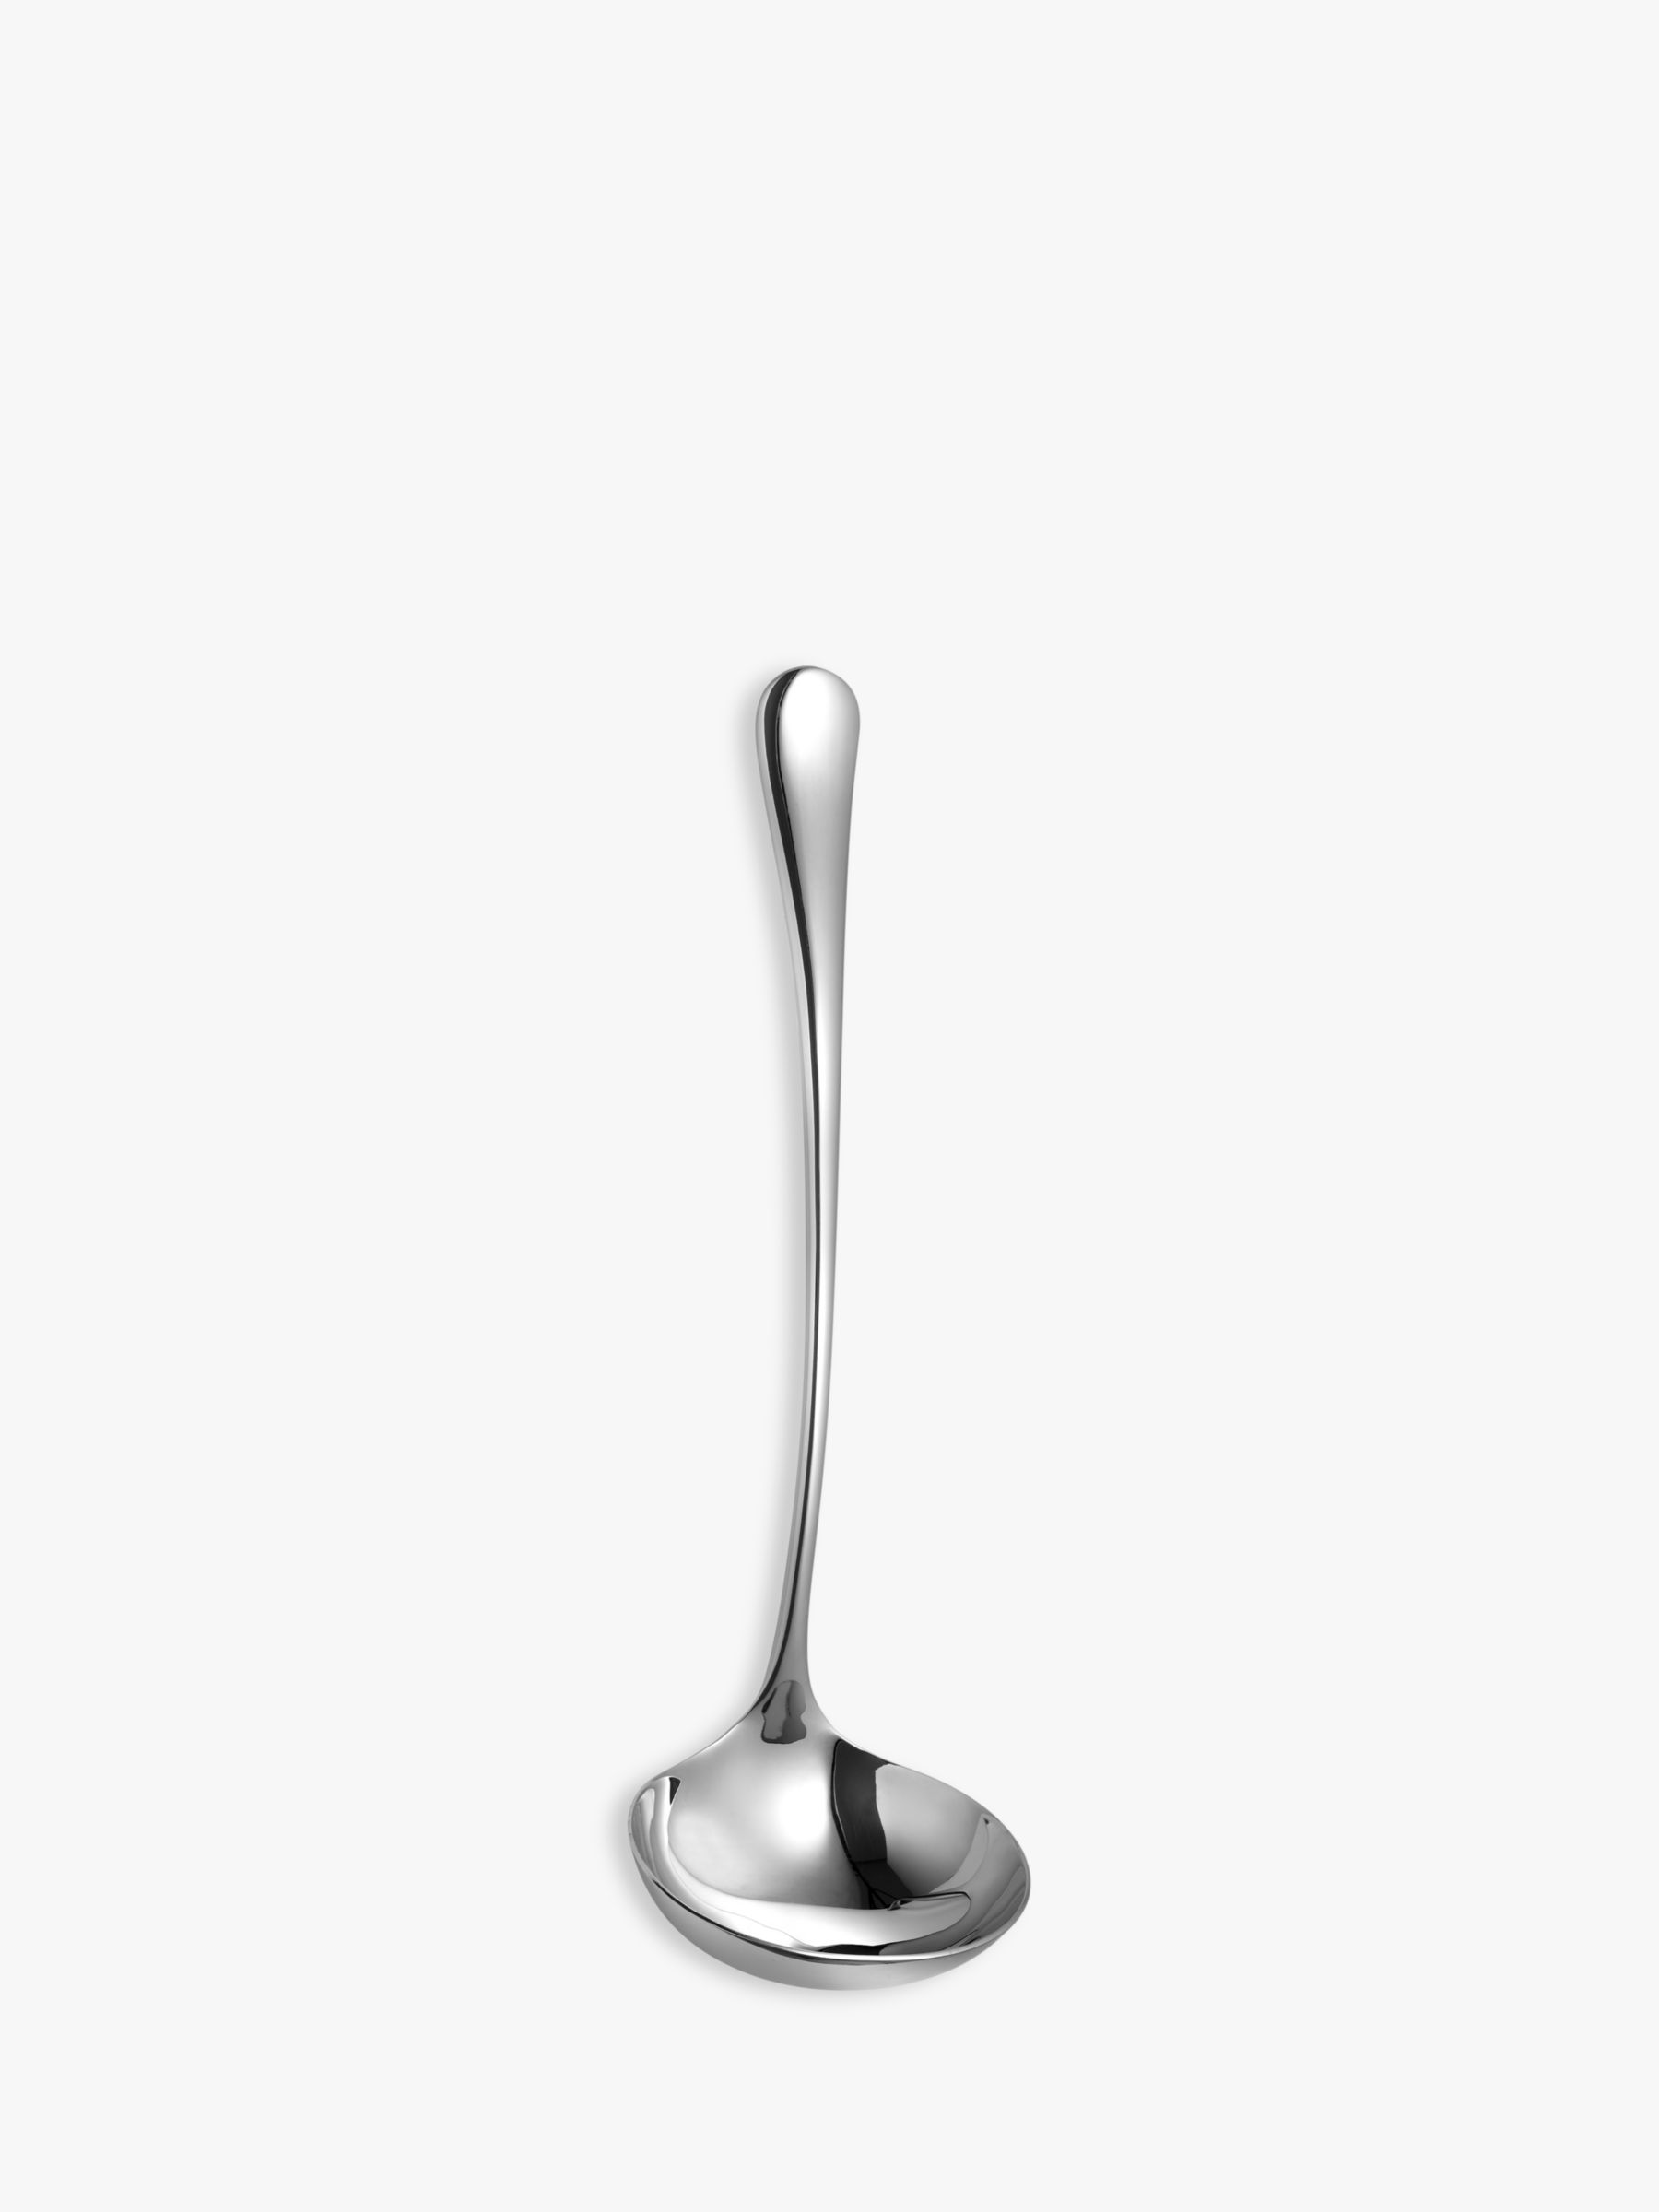 Robert Welch Radford Soup Ladle, Stainless Steel